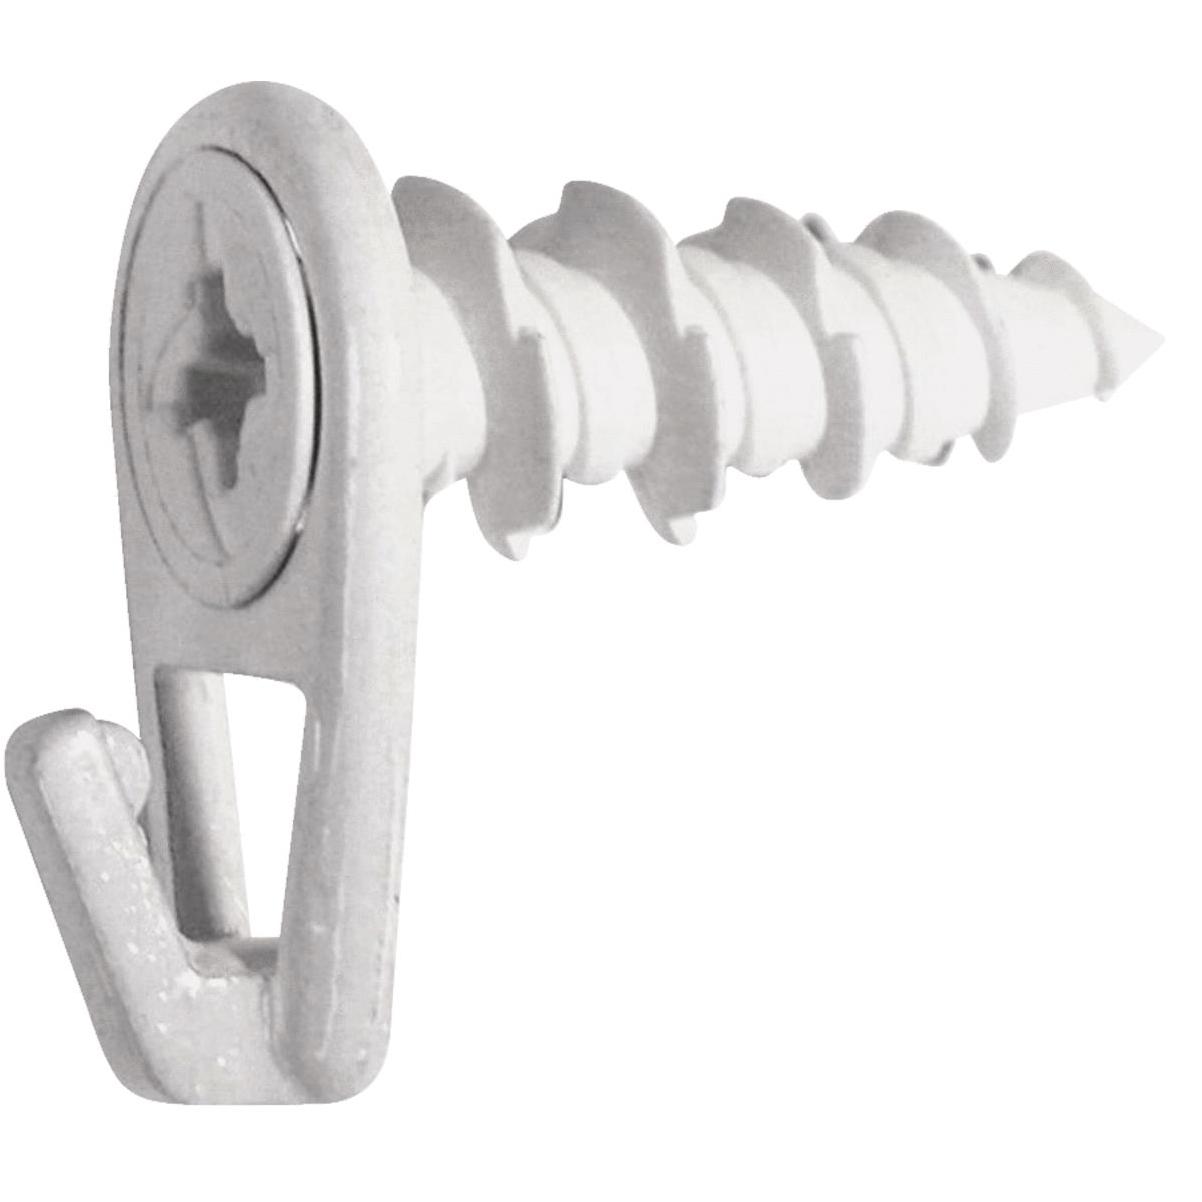 Hillman 30lb Large D-ring Hangers (4 Pack) in the Picture Hangers